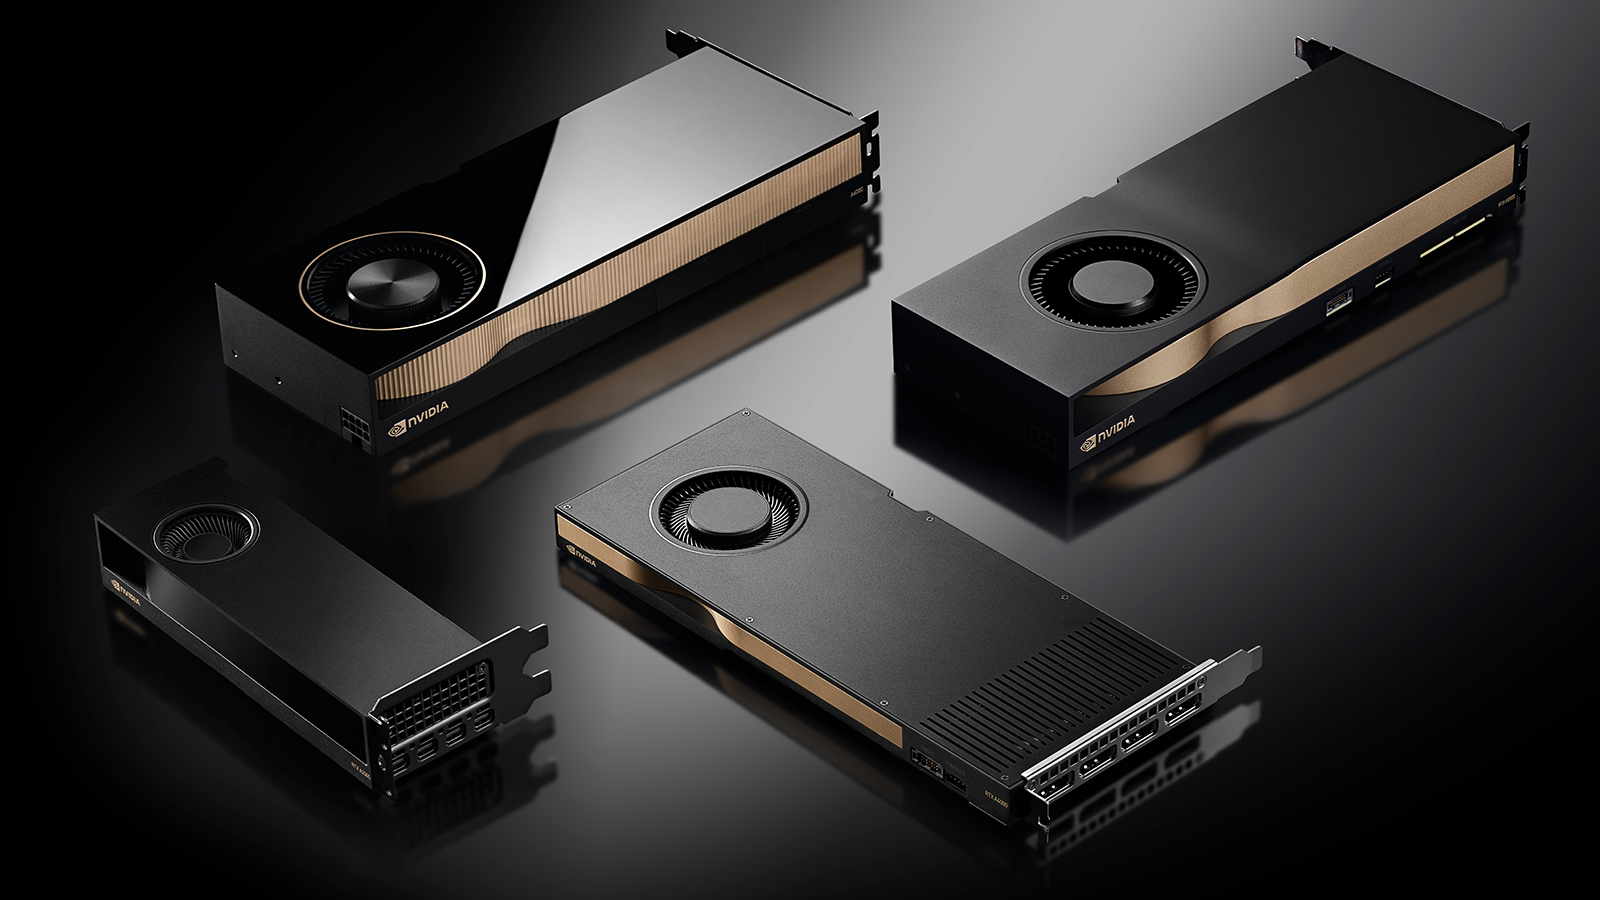 NVIDIA RTX A2000 GPU Launched for Mainstream Professional Graphics